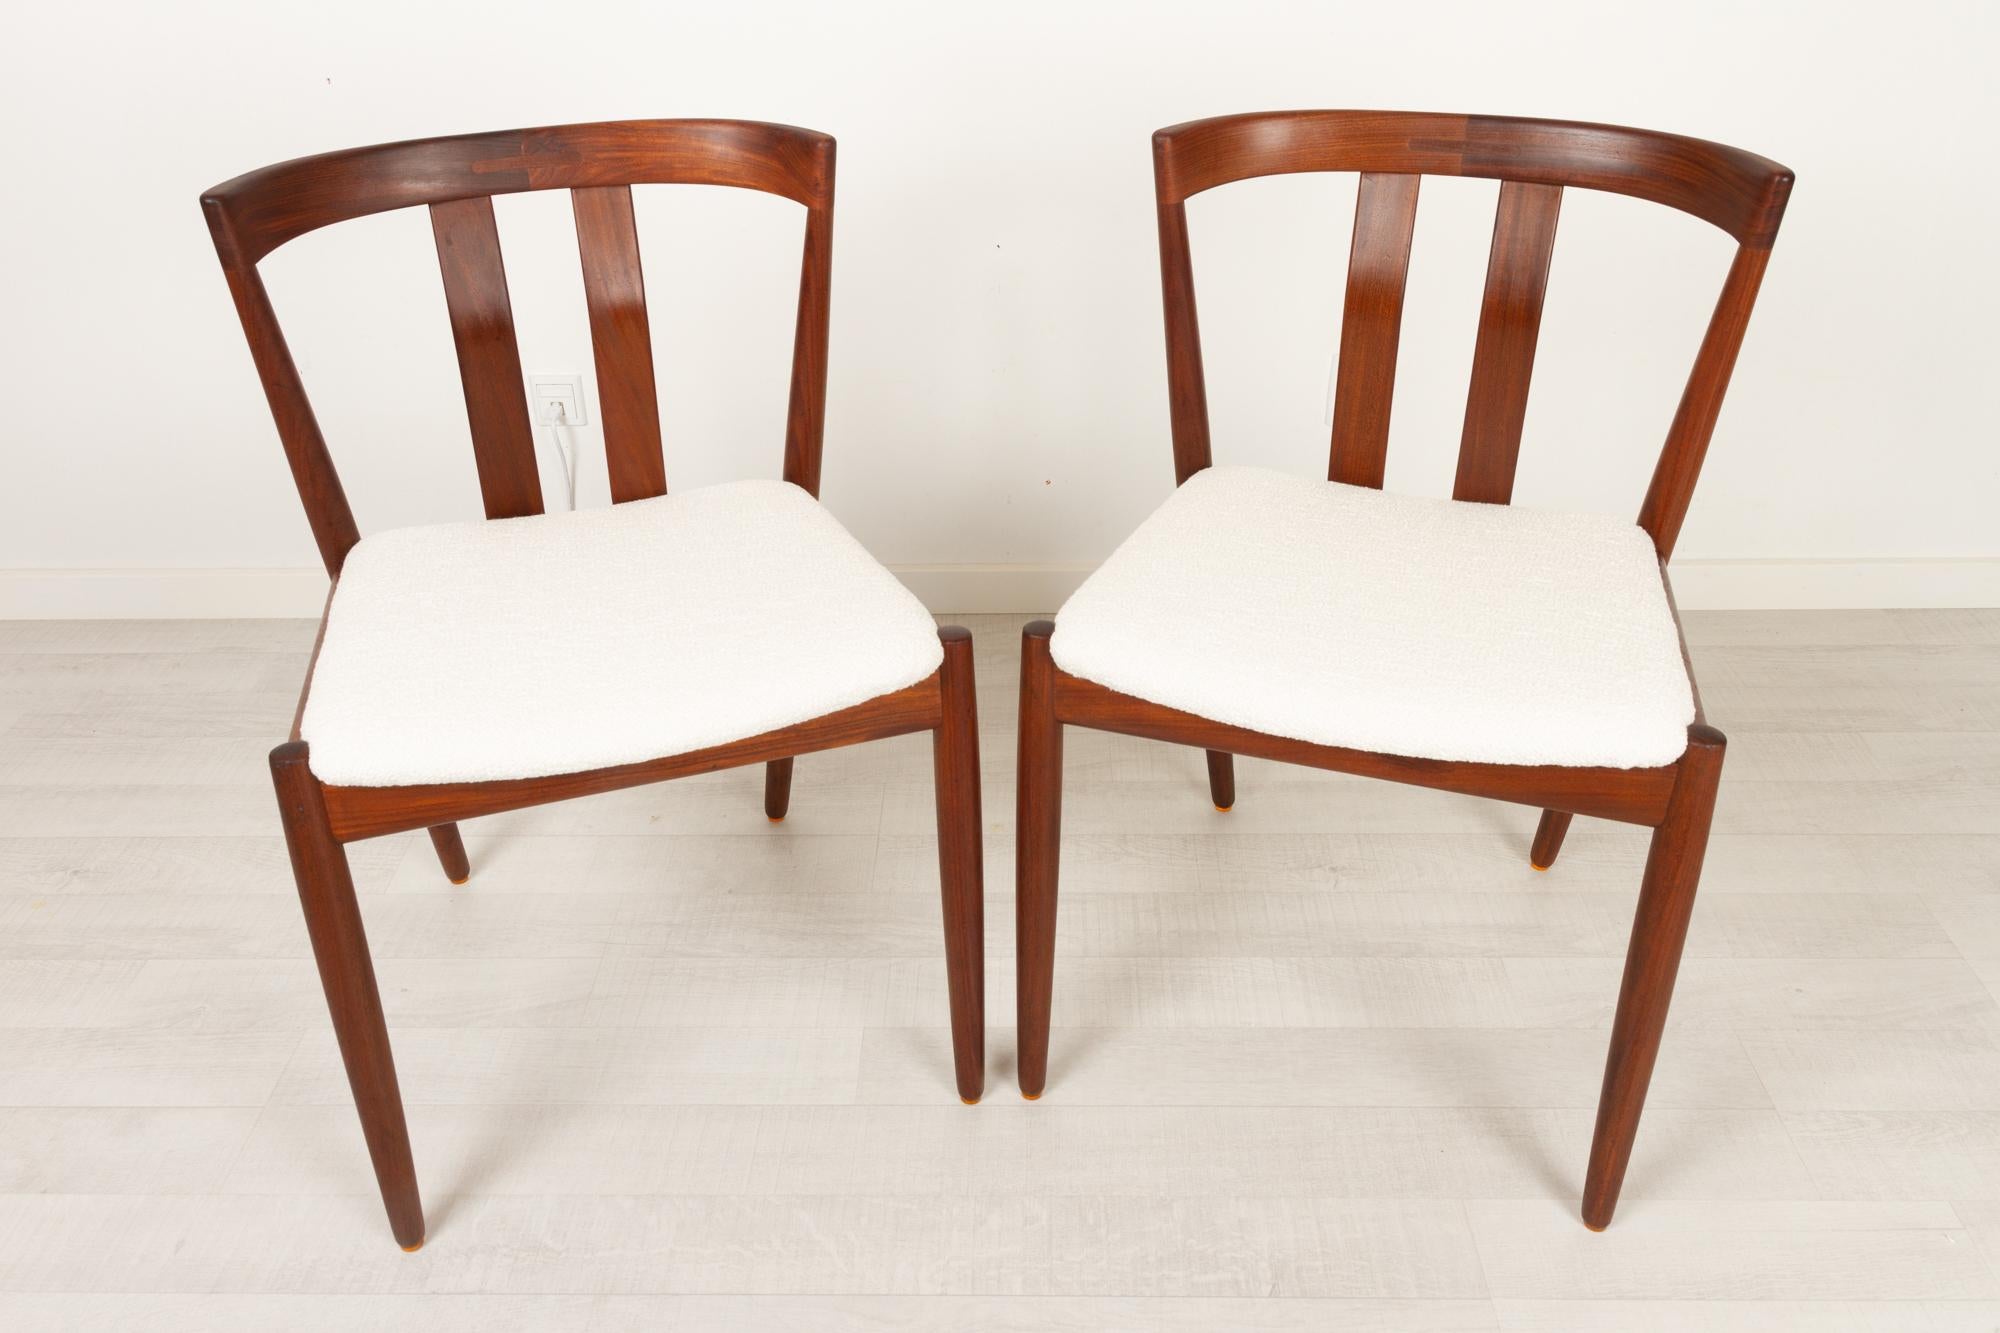 Vintage Danish Teak Dining Chairs 1960s, Set of 2 For Sale 1